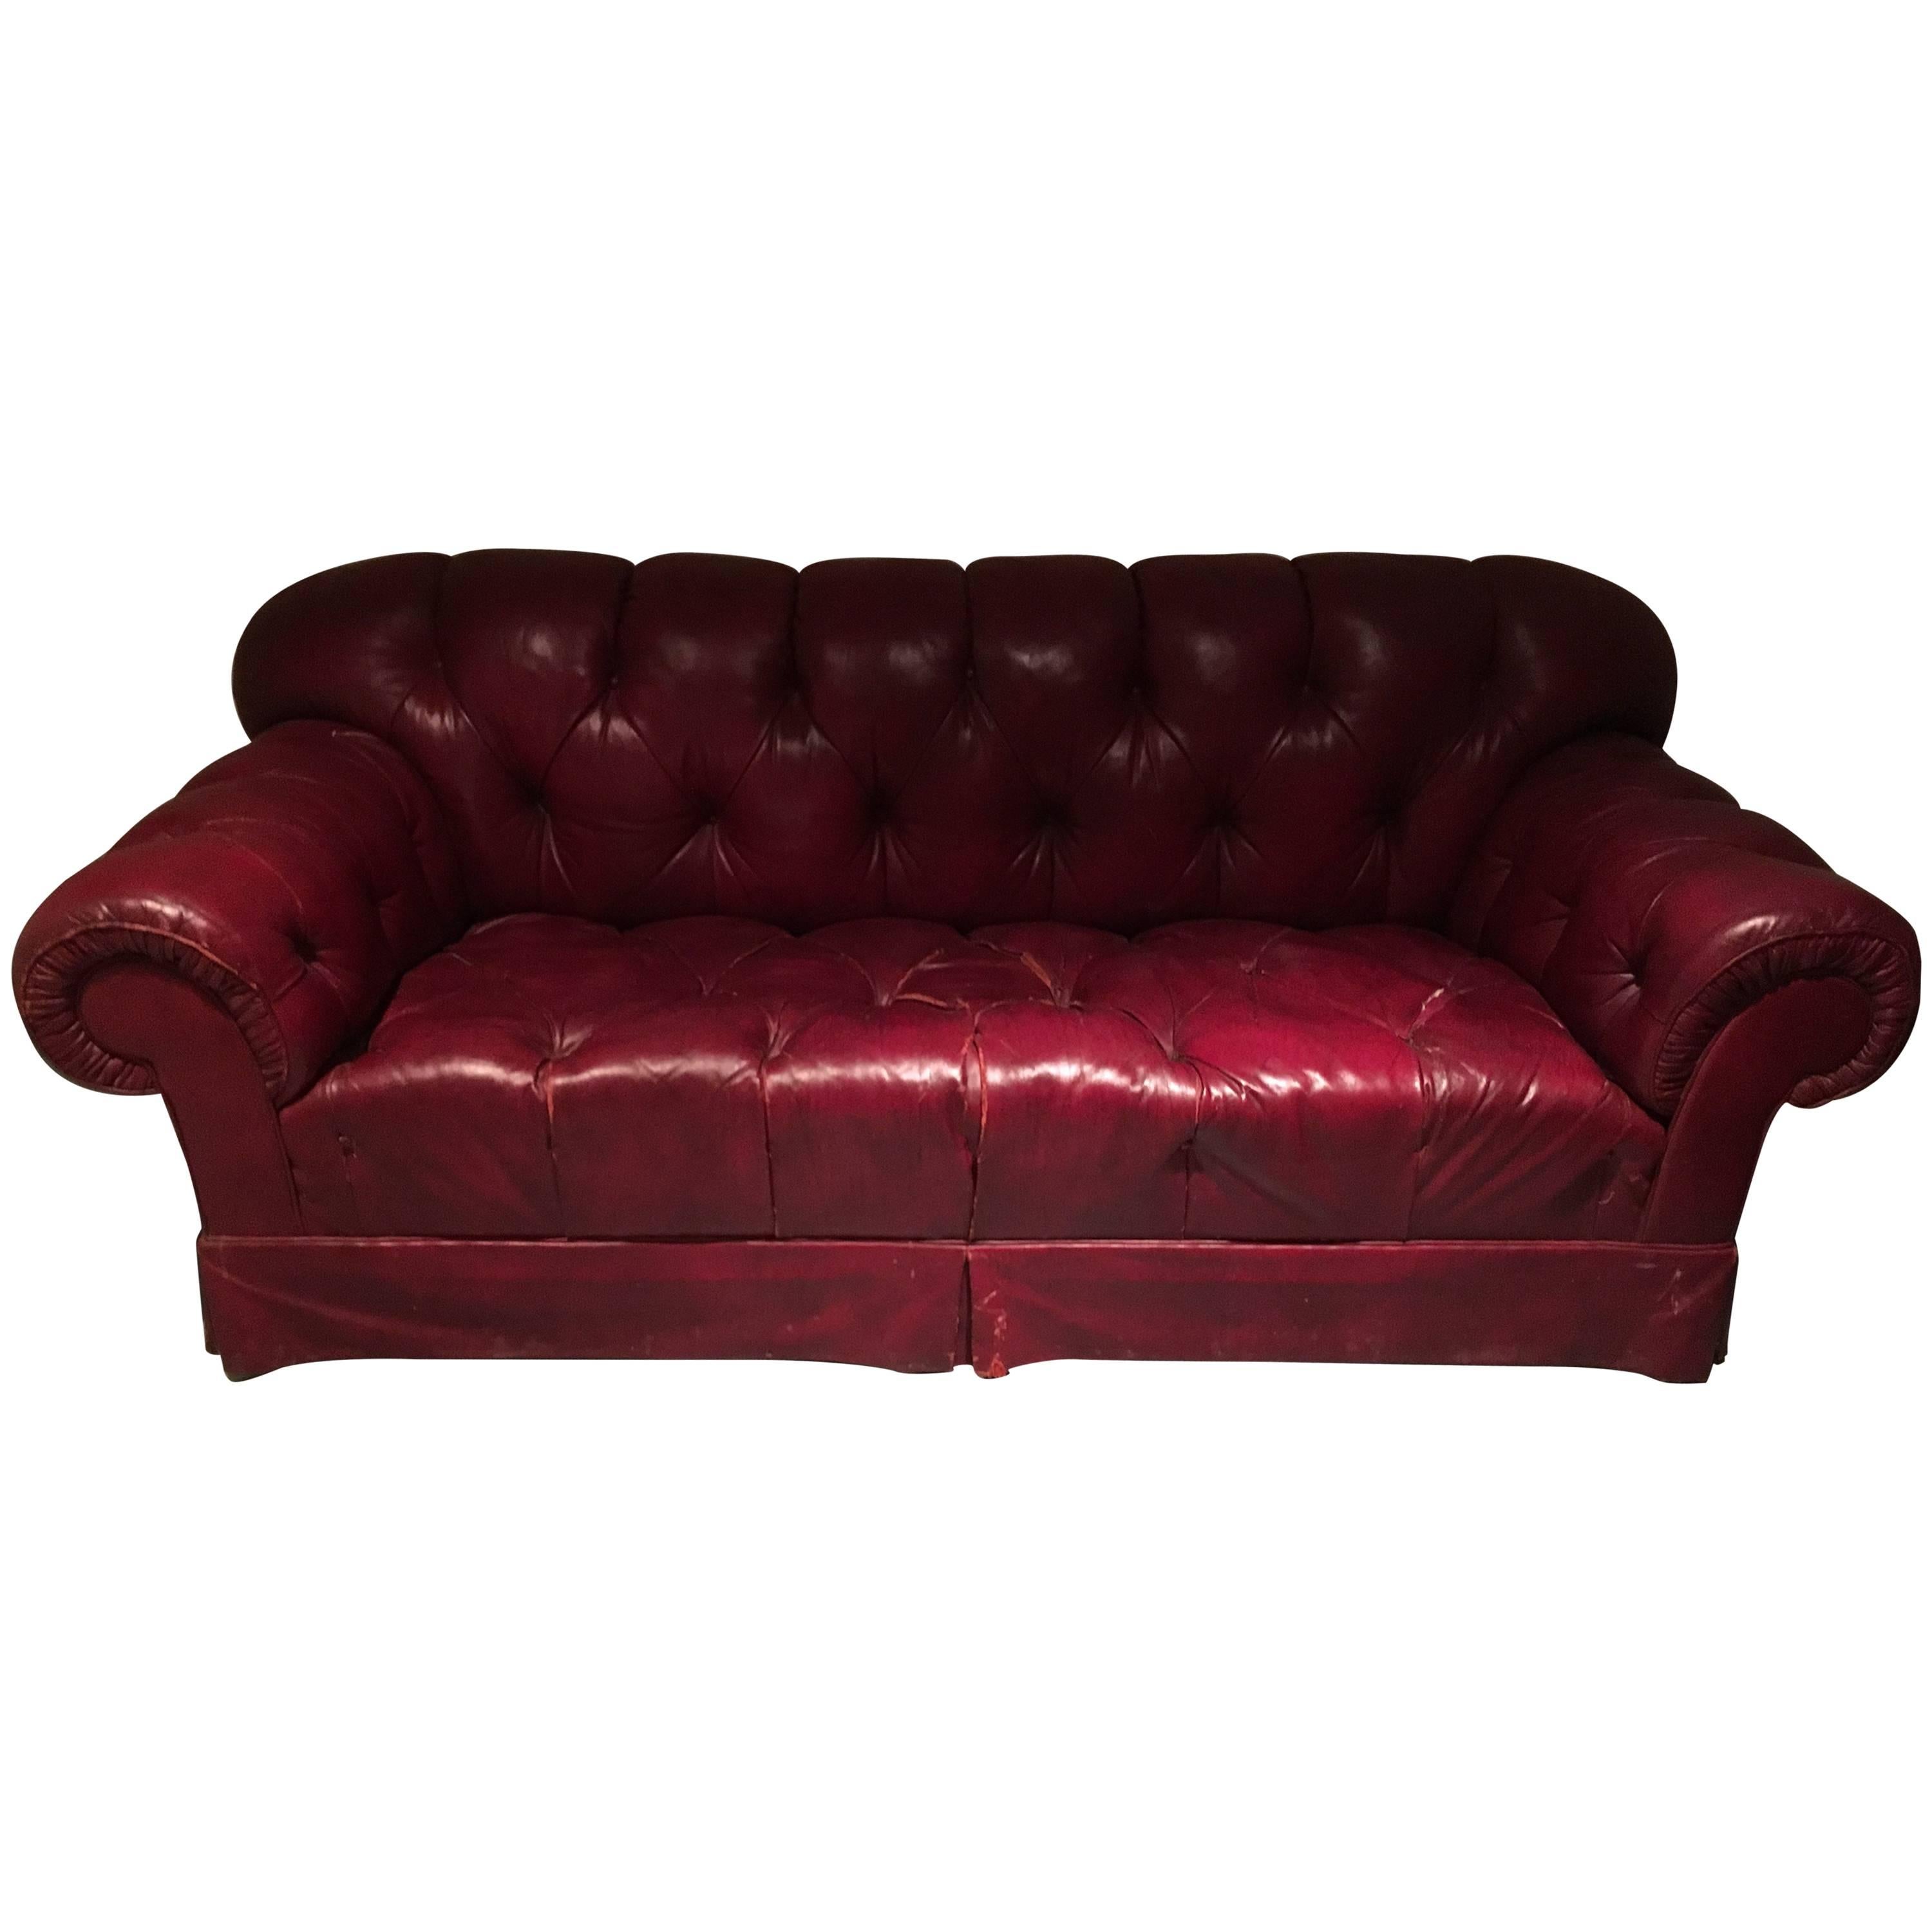 Chesterfield Sofa in Burgundy Leather